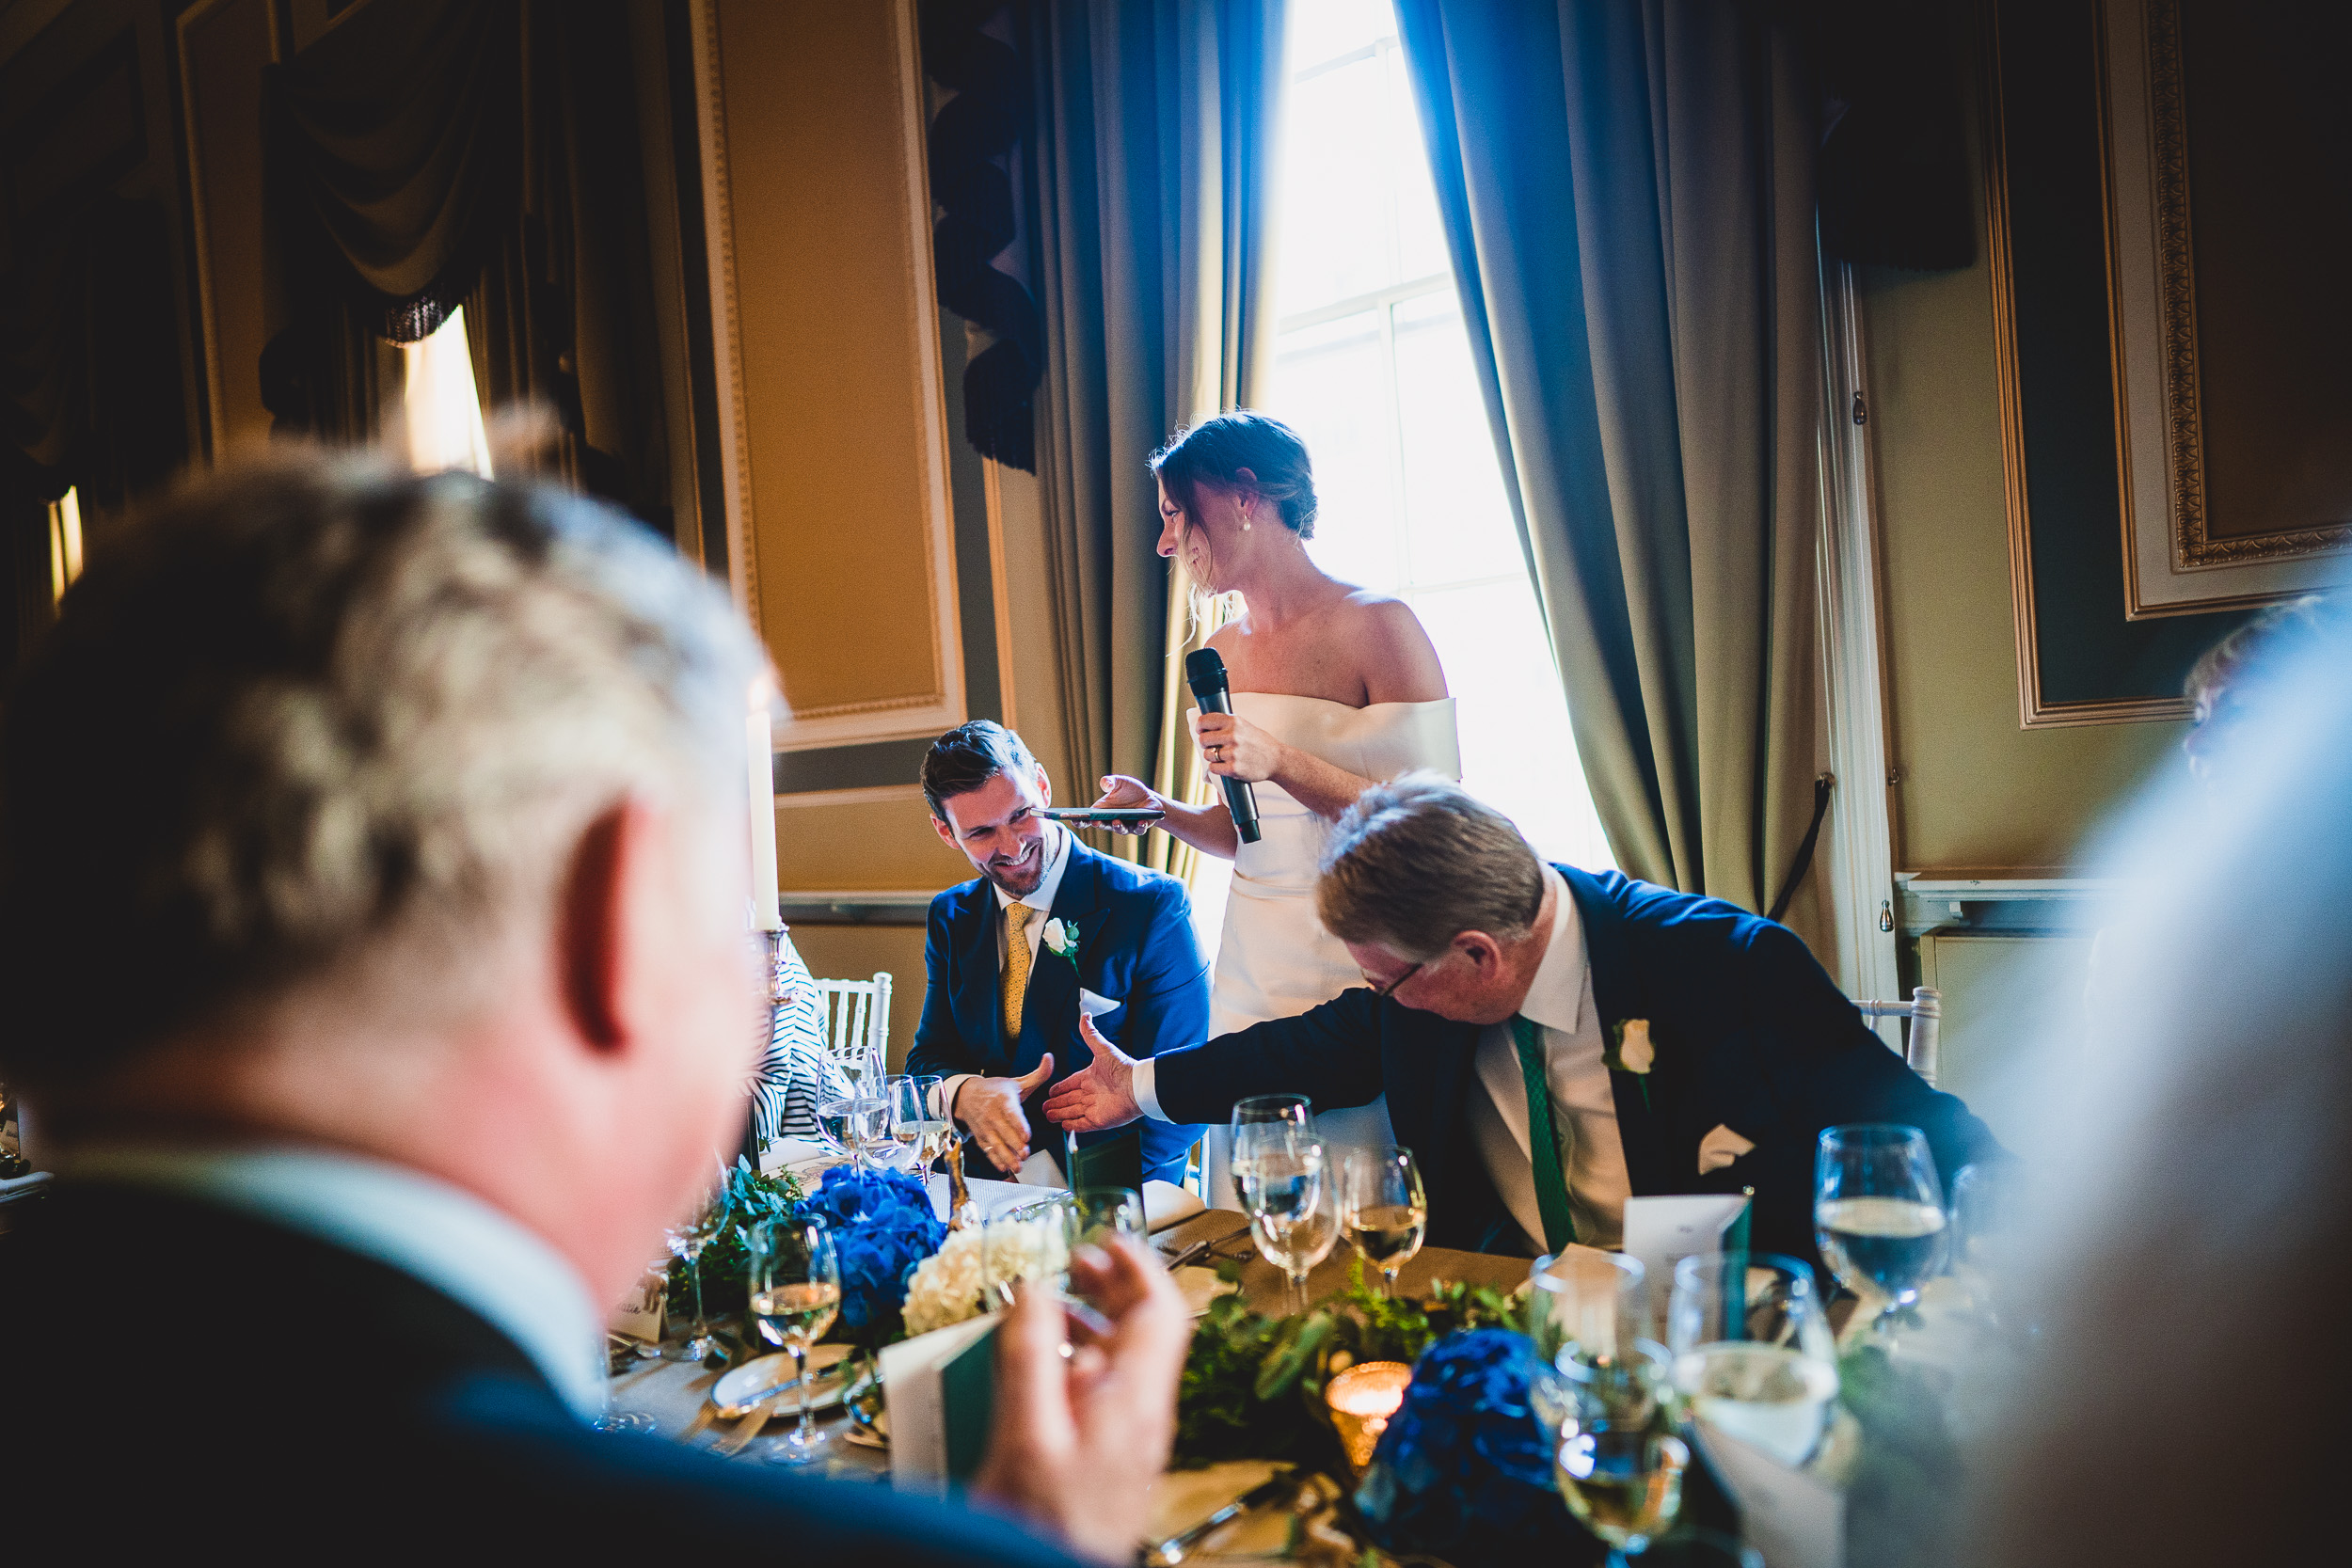 A wedding photo capturing the bride and groom at a table.